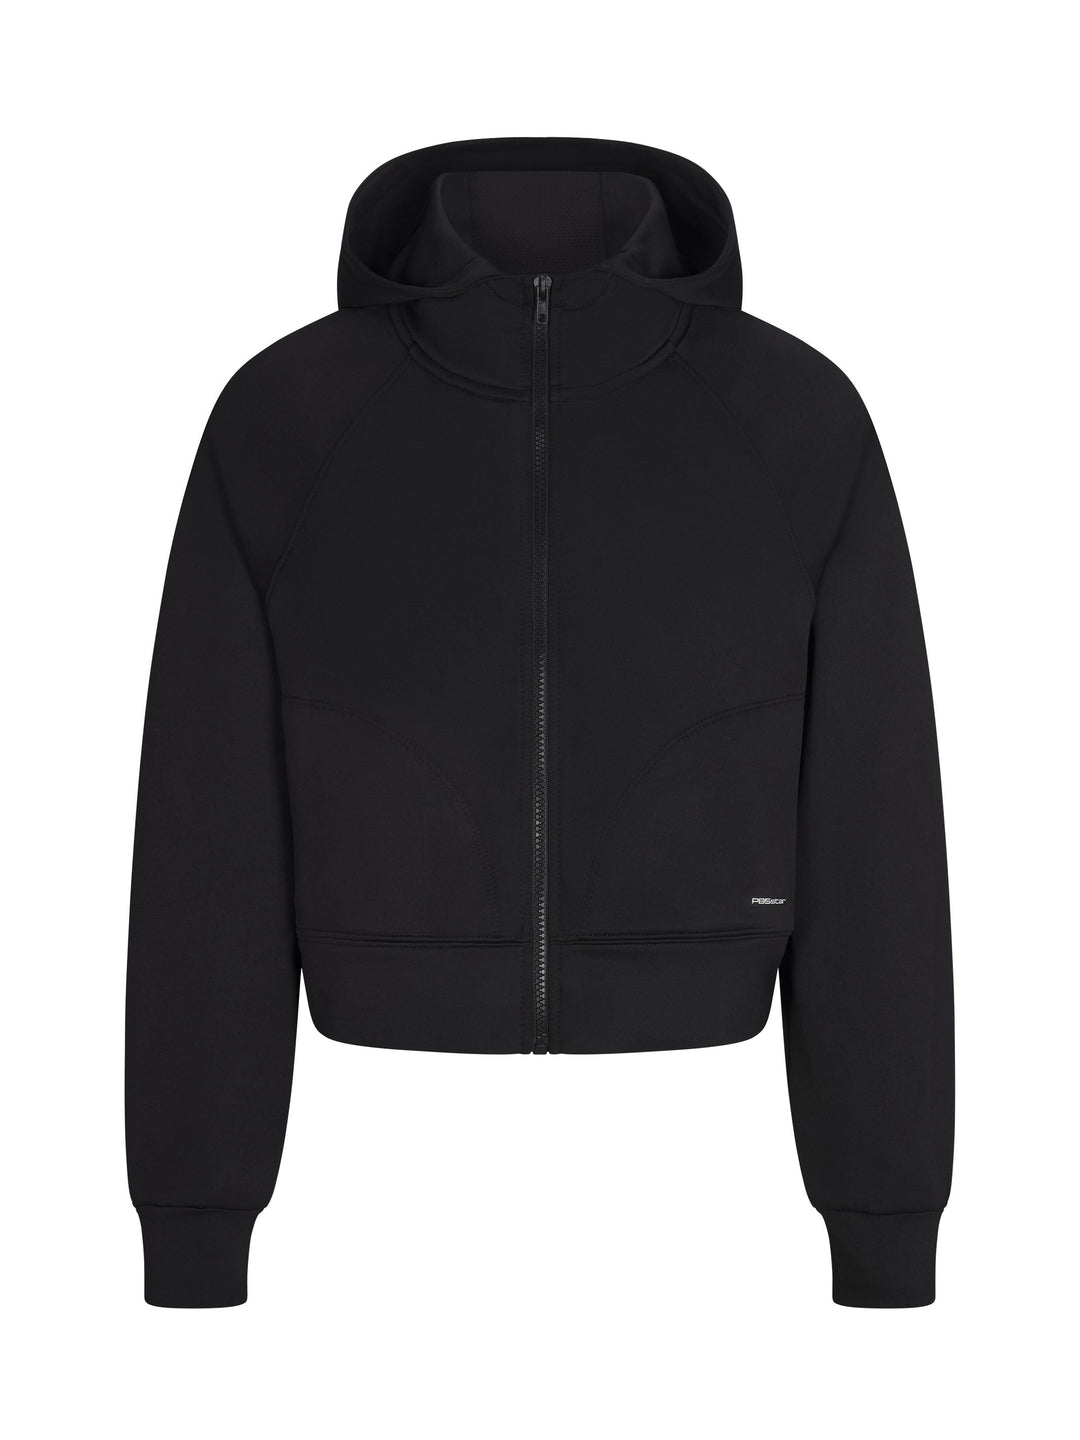 Women's Cropped Performance Hoodie front view in Black.